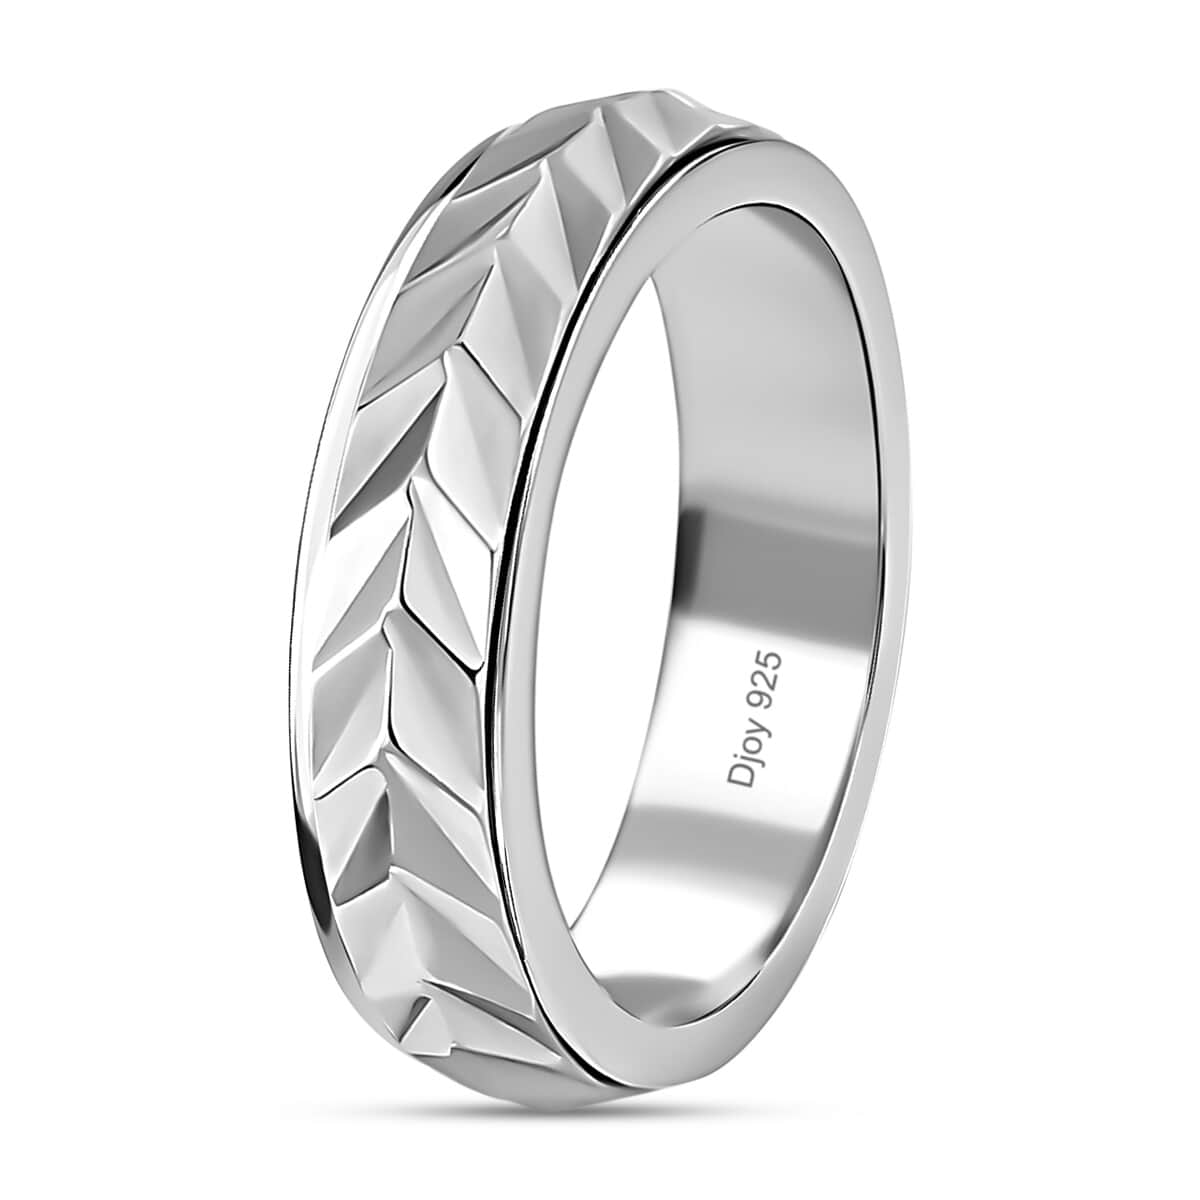 Spinner Band Ring in Platinum Over Sterling Silver, Fidget Rings for Anxiety, Stress Relieving Anxiety Ring, Wedding Band, Promise Rings 3.75 g (Size 5.0) image number 3